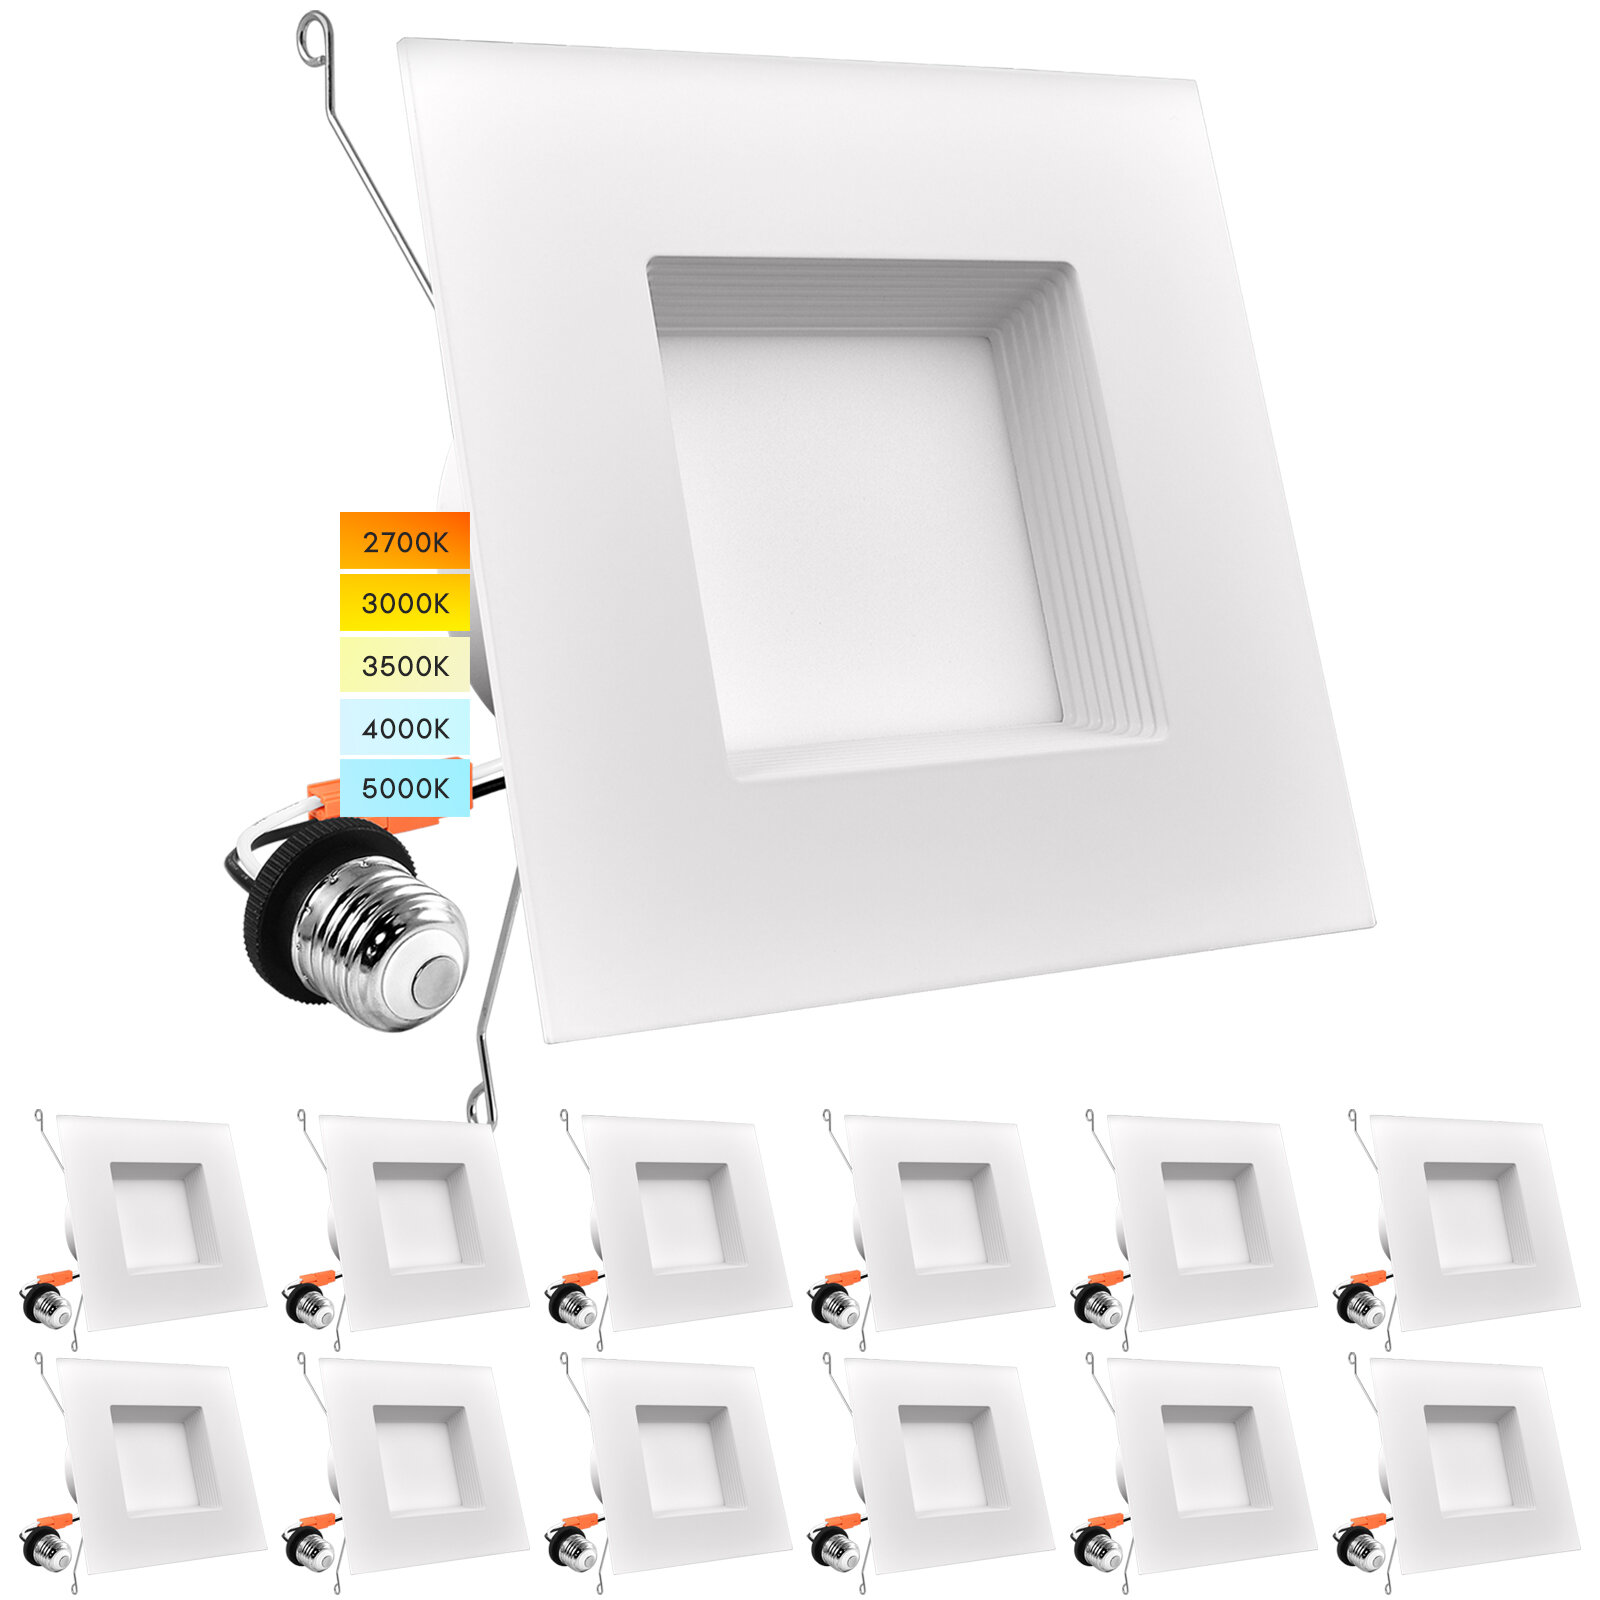 10X Natural White 15W 8" Square LED Recessed Ceiling Panel Down Light Bulb Lamp